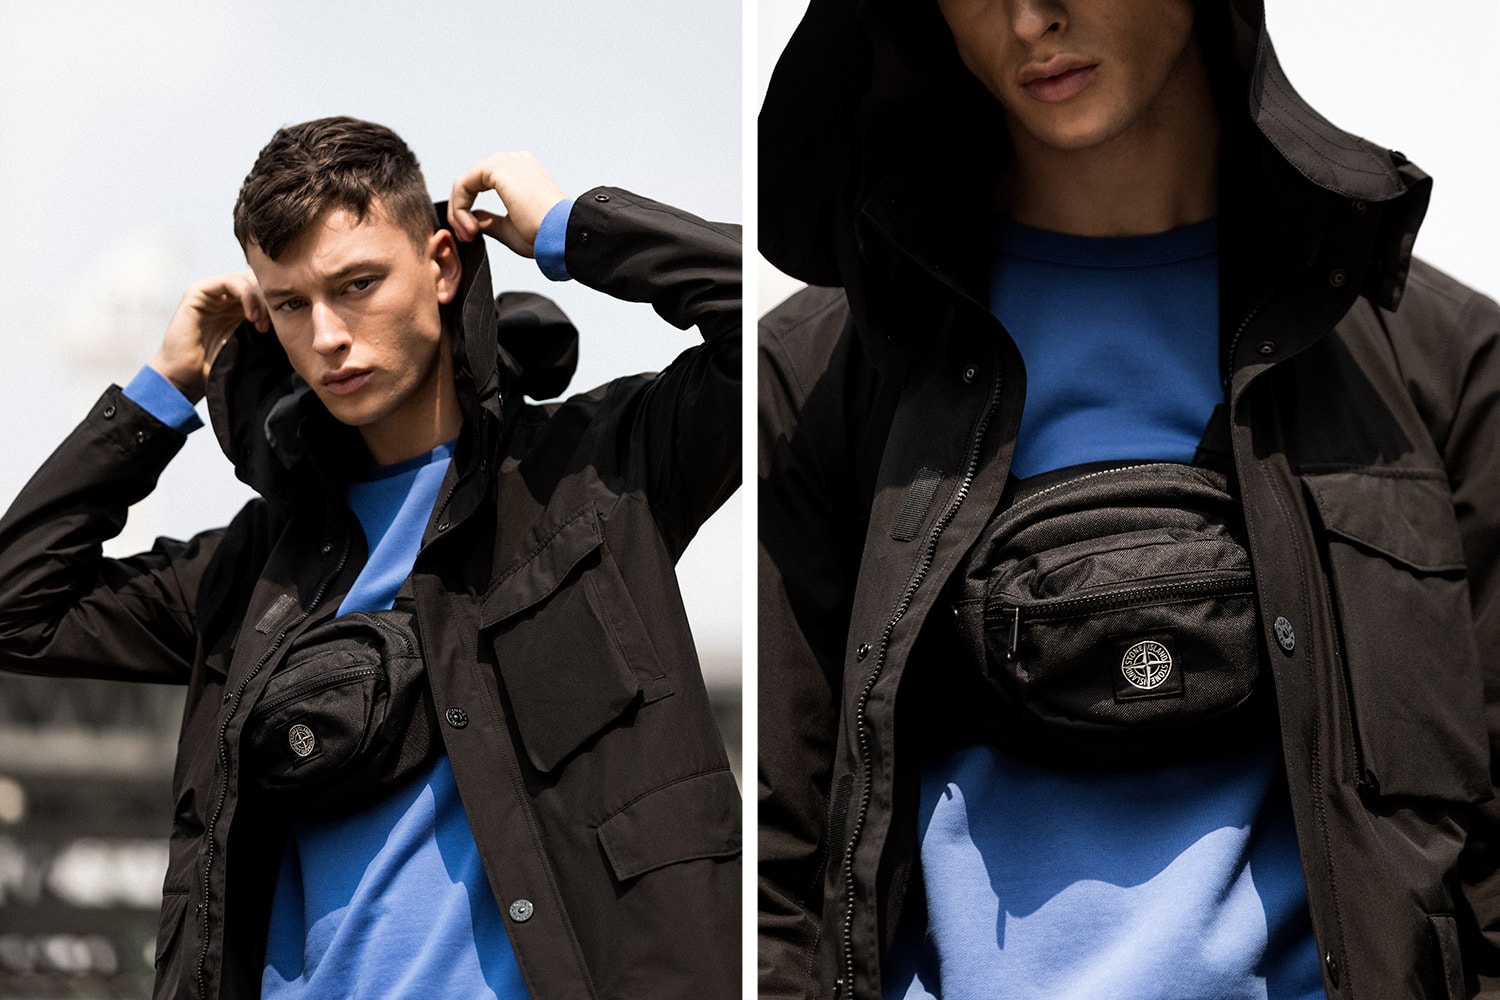 Stone Island Spring/Summer 2019 Collection